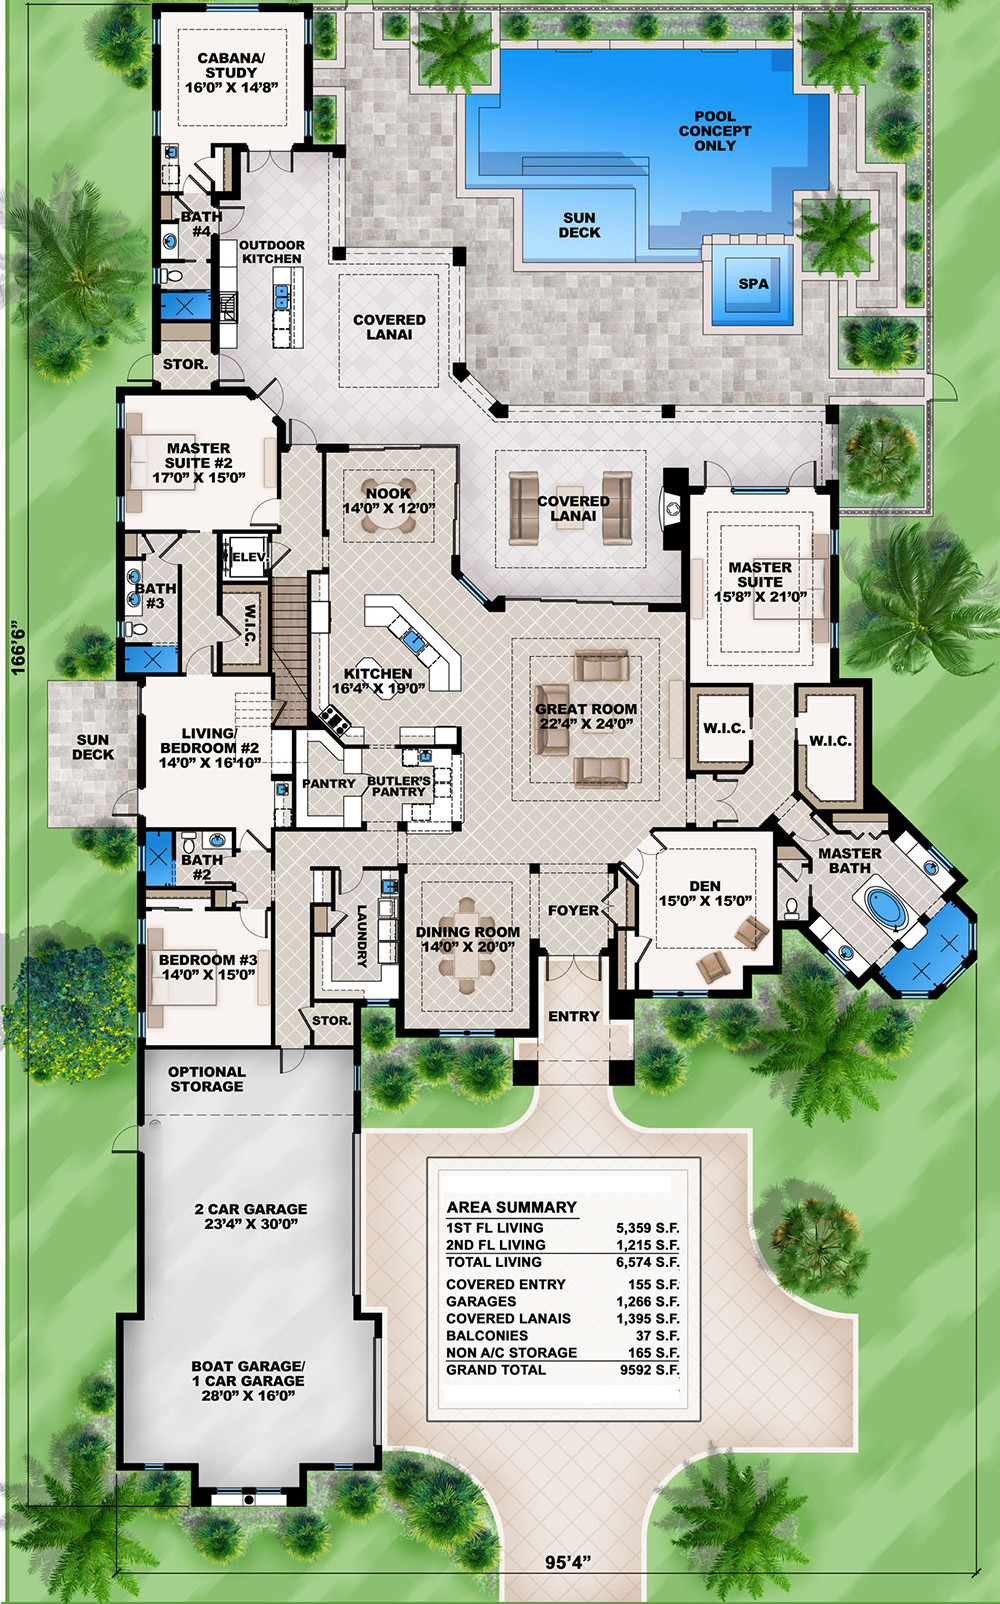 Two Master Bedroom House Plans
 Mediterranean Dream Home Plan with 2 Master Suites